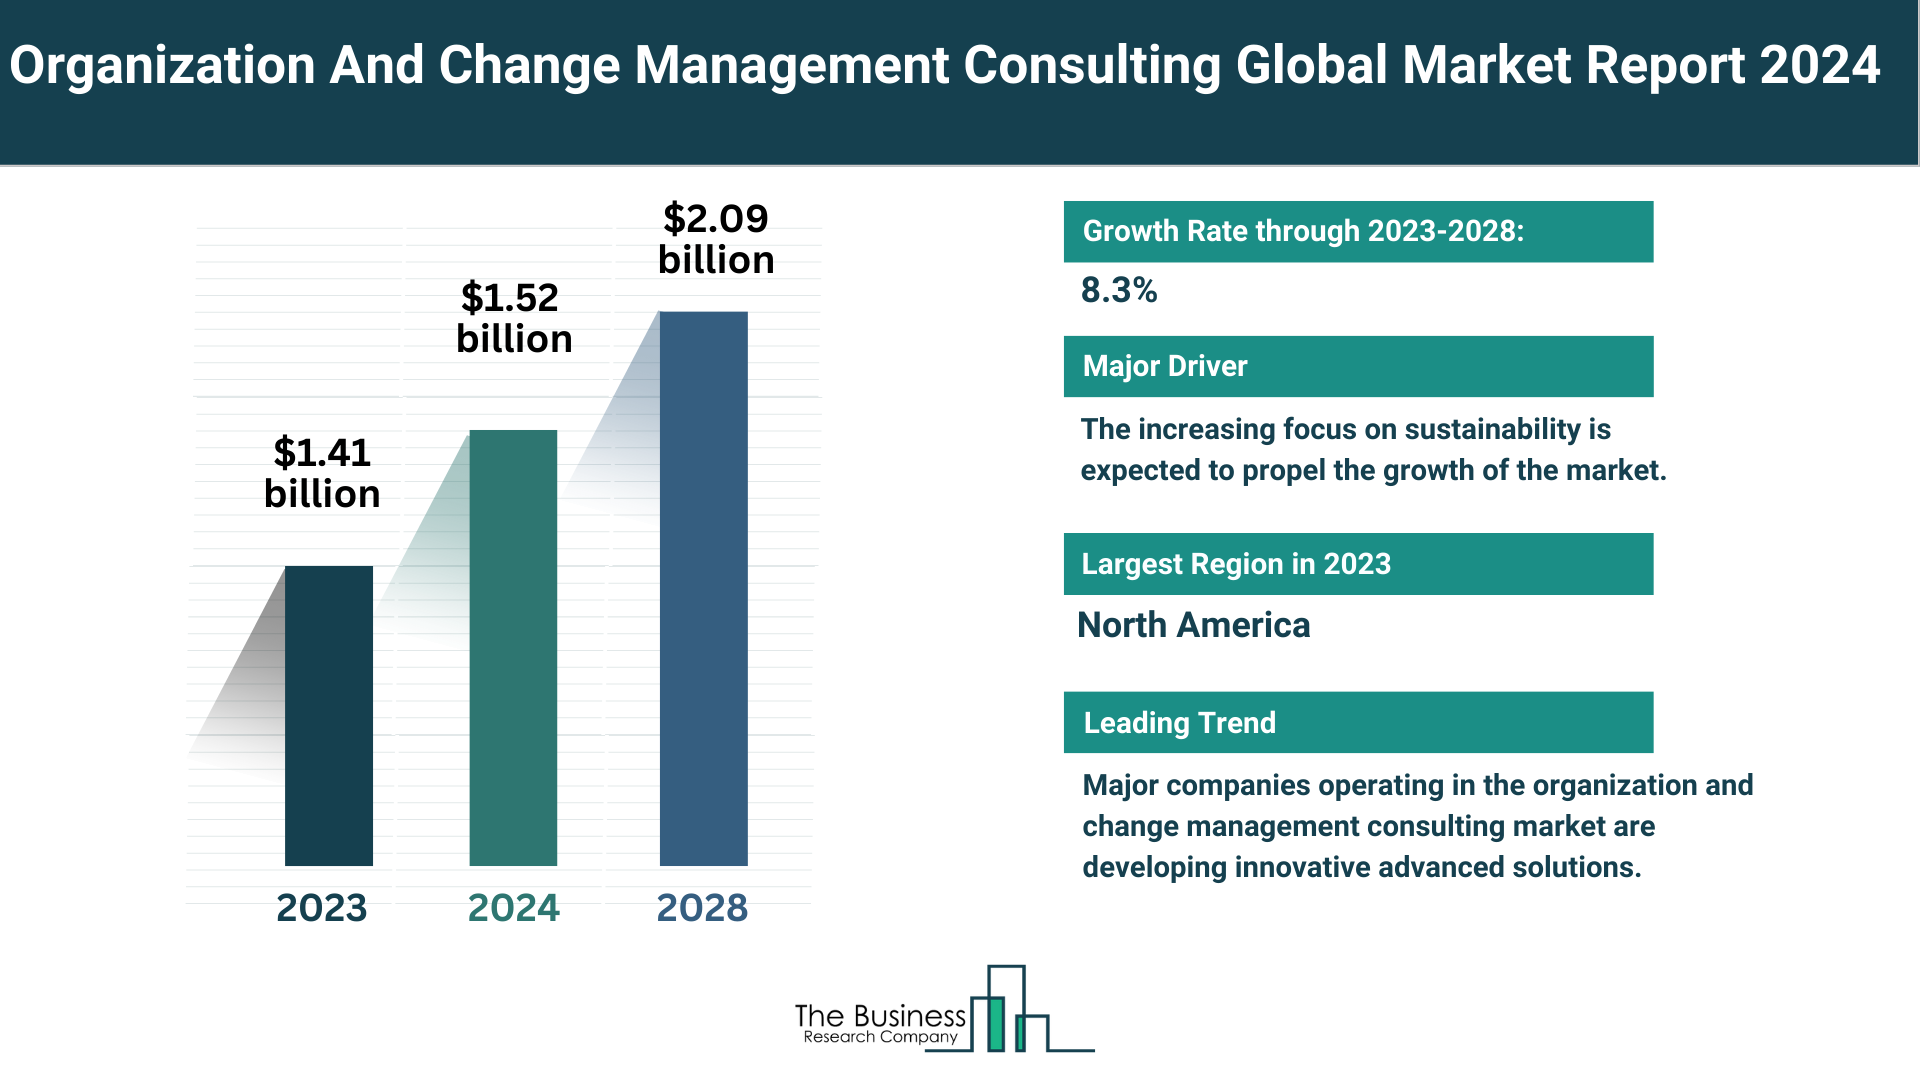 Global Organization And Change Management Consulting Market